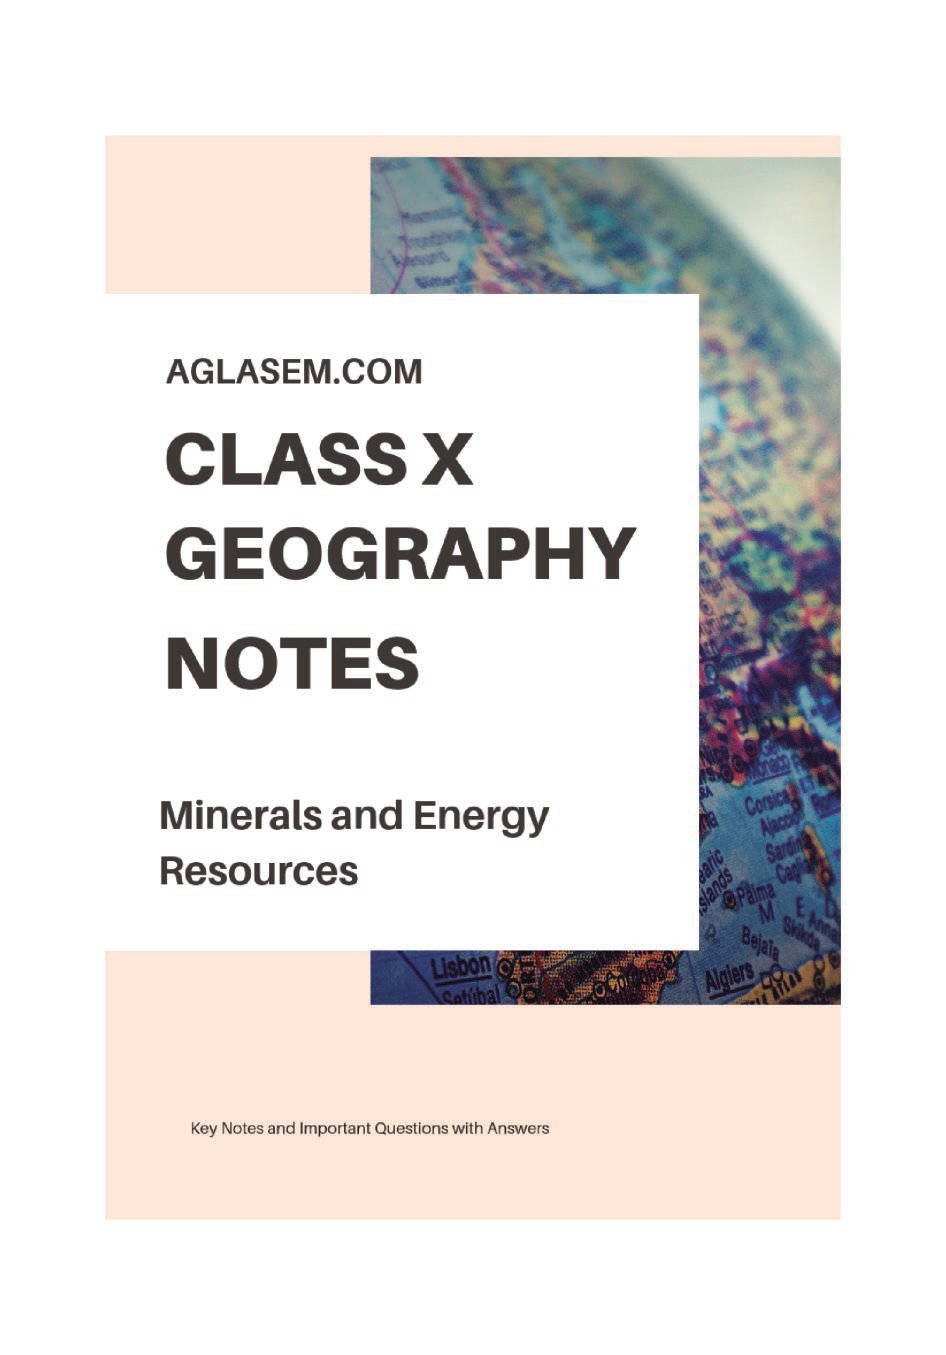 Class 10 Social Science Geography Notes for Minerals and Energy Resources - Page 1